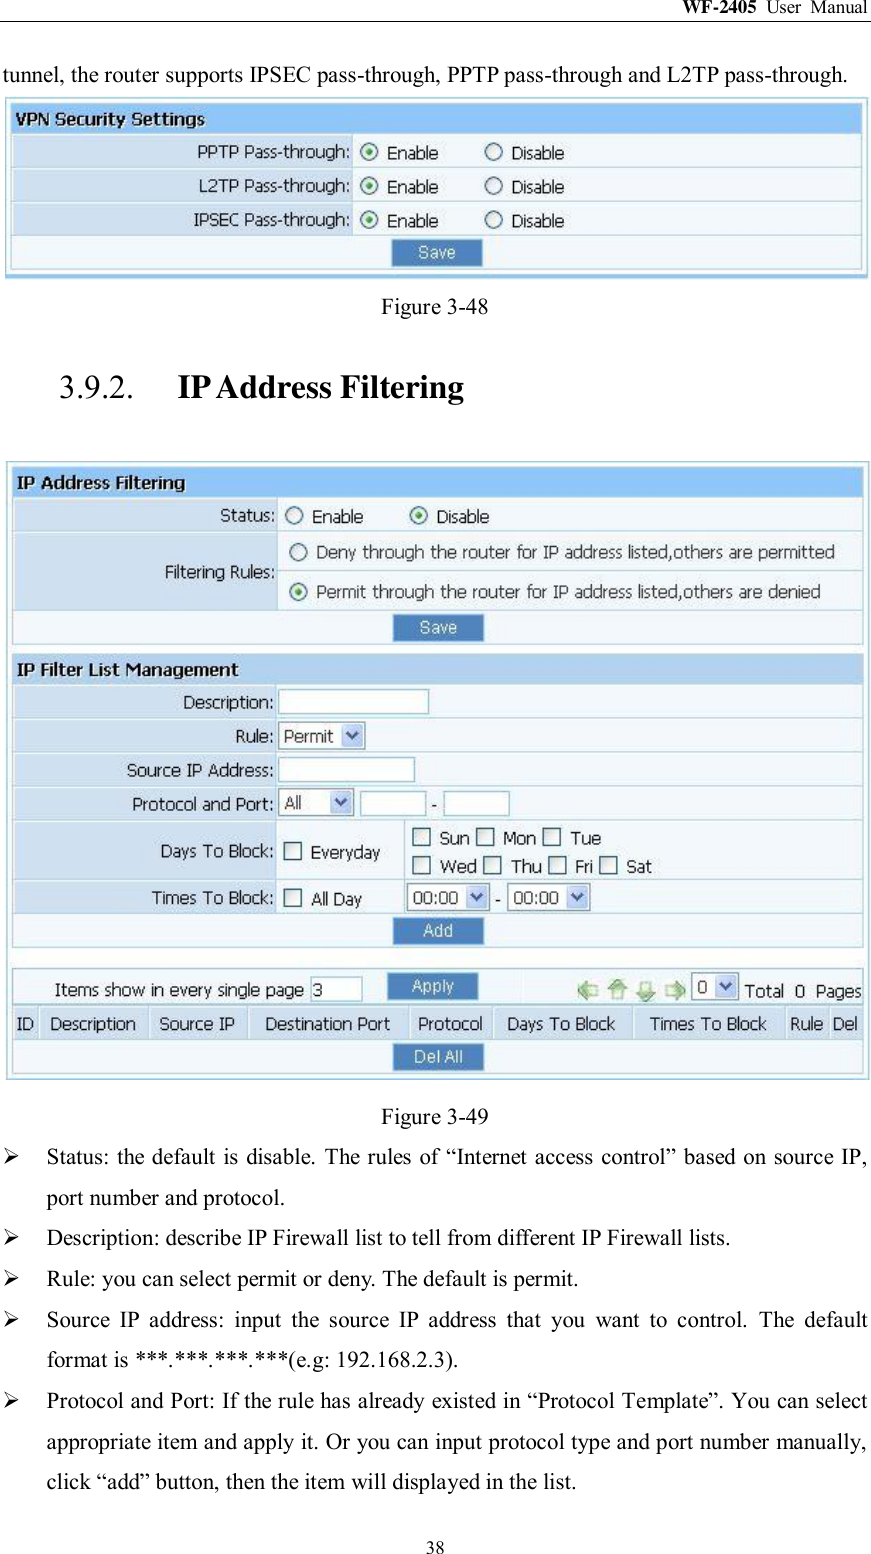 WF-2405  User  Manual  38 tunnel, the router supports IPSEC pass-through, PPTP pass-through and L2TP pass-through.  Figure 3-48 3.9.2. IP Address Filtering  Figure 3-49  Status: the default is disable.  The rules of “Internet access control” based on source IP, port number and protocol.  Description: describe IP Firewall list to tell from different IP Firewall lists.  Rule: you can select permit or deny. The default is permit.  Source  IP  address:  input  the  source  IP  address  that  you  want  to  control.  The  default format is ***.***.***.***(e.g: 192.168.2.3).  Protocol and Port: If the rule has already existed in “Protocol Template”. You can select appropriate item and apply it. Or you can input protocol type and port number manually, click “add” button, then the item will displayed in the list. 